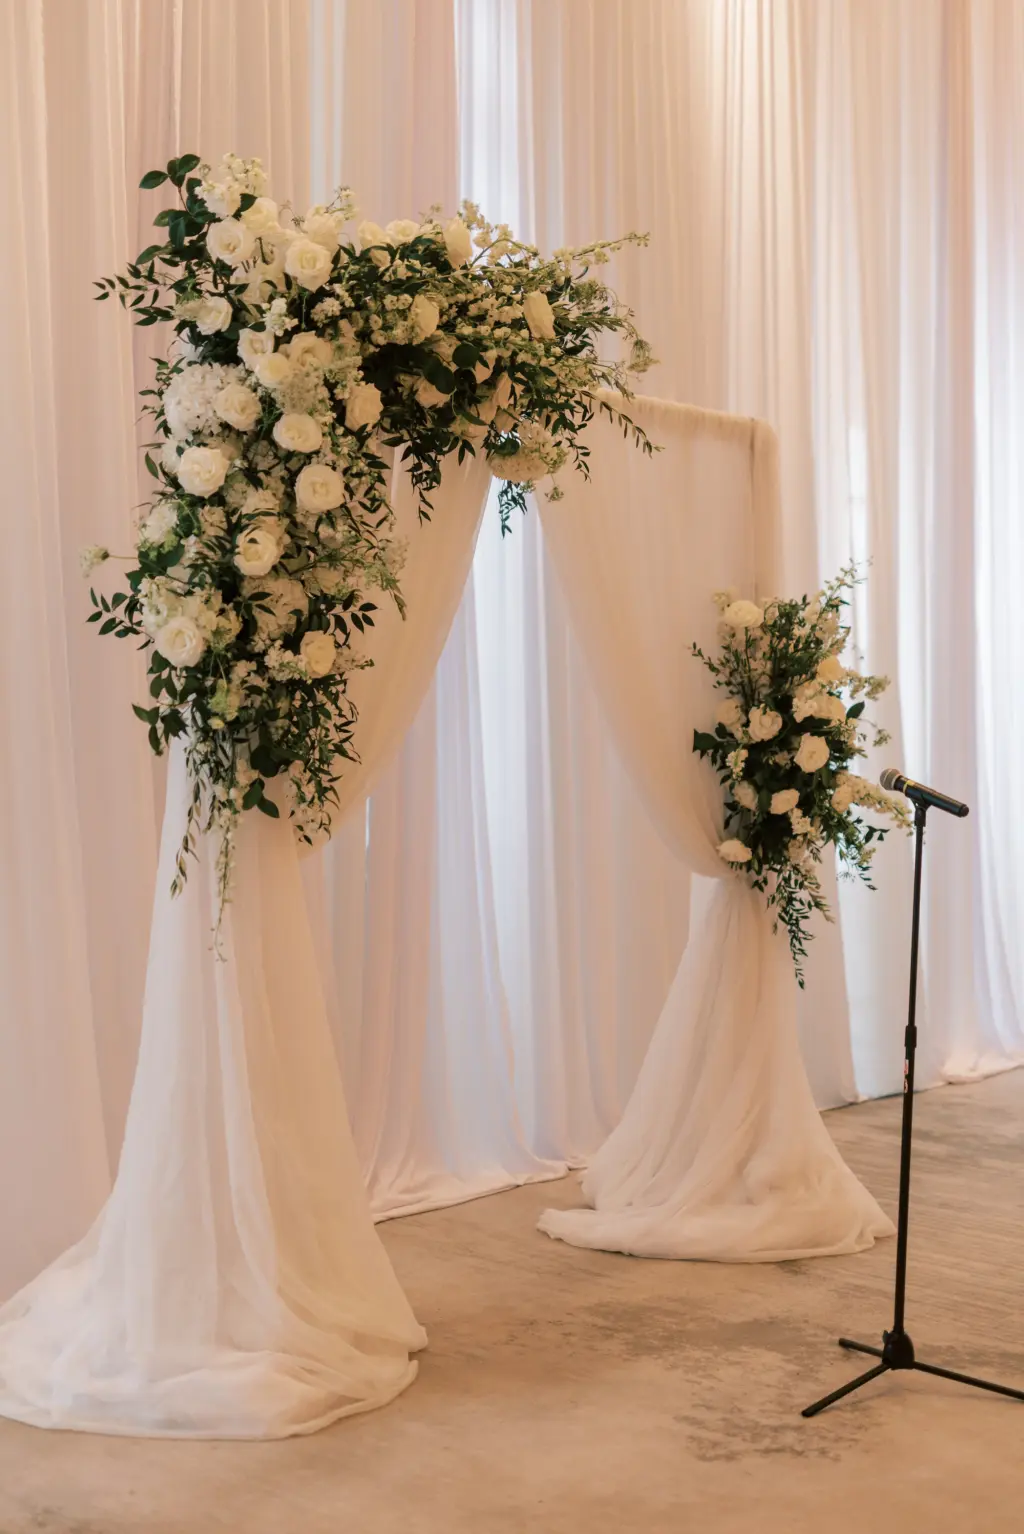 White Pipe and Drapery for Wedding Ceremony | Monochromatic Floral Arrangement for Wedding Ceremony Arch | Garden Roses, Stock Flowers, and Greenery | Tampa Bay Rental Company Gabro Event Services